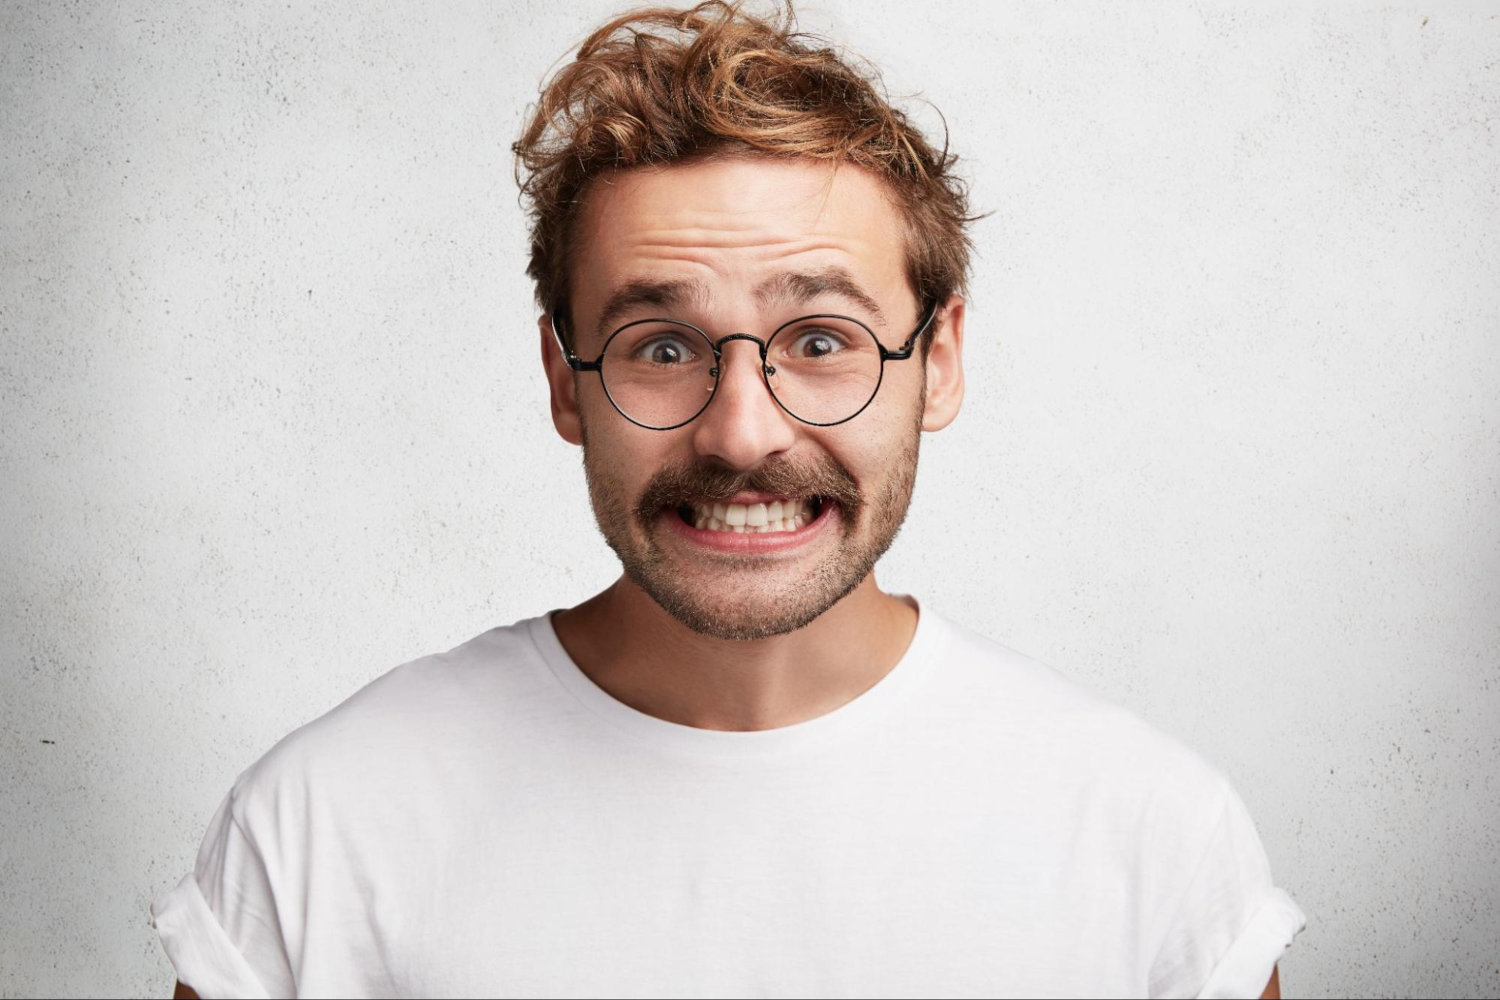 wide smile with glasses man